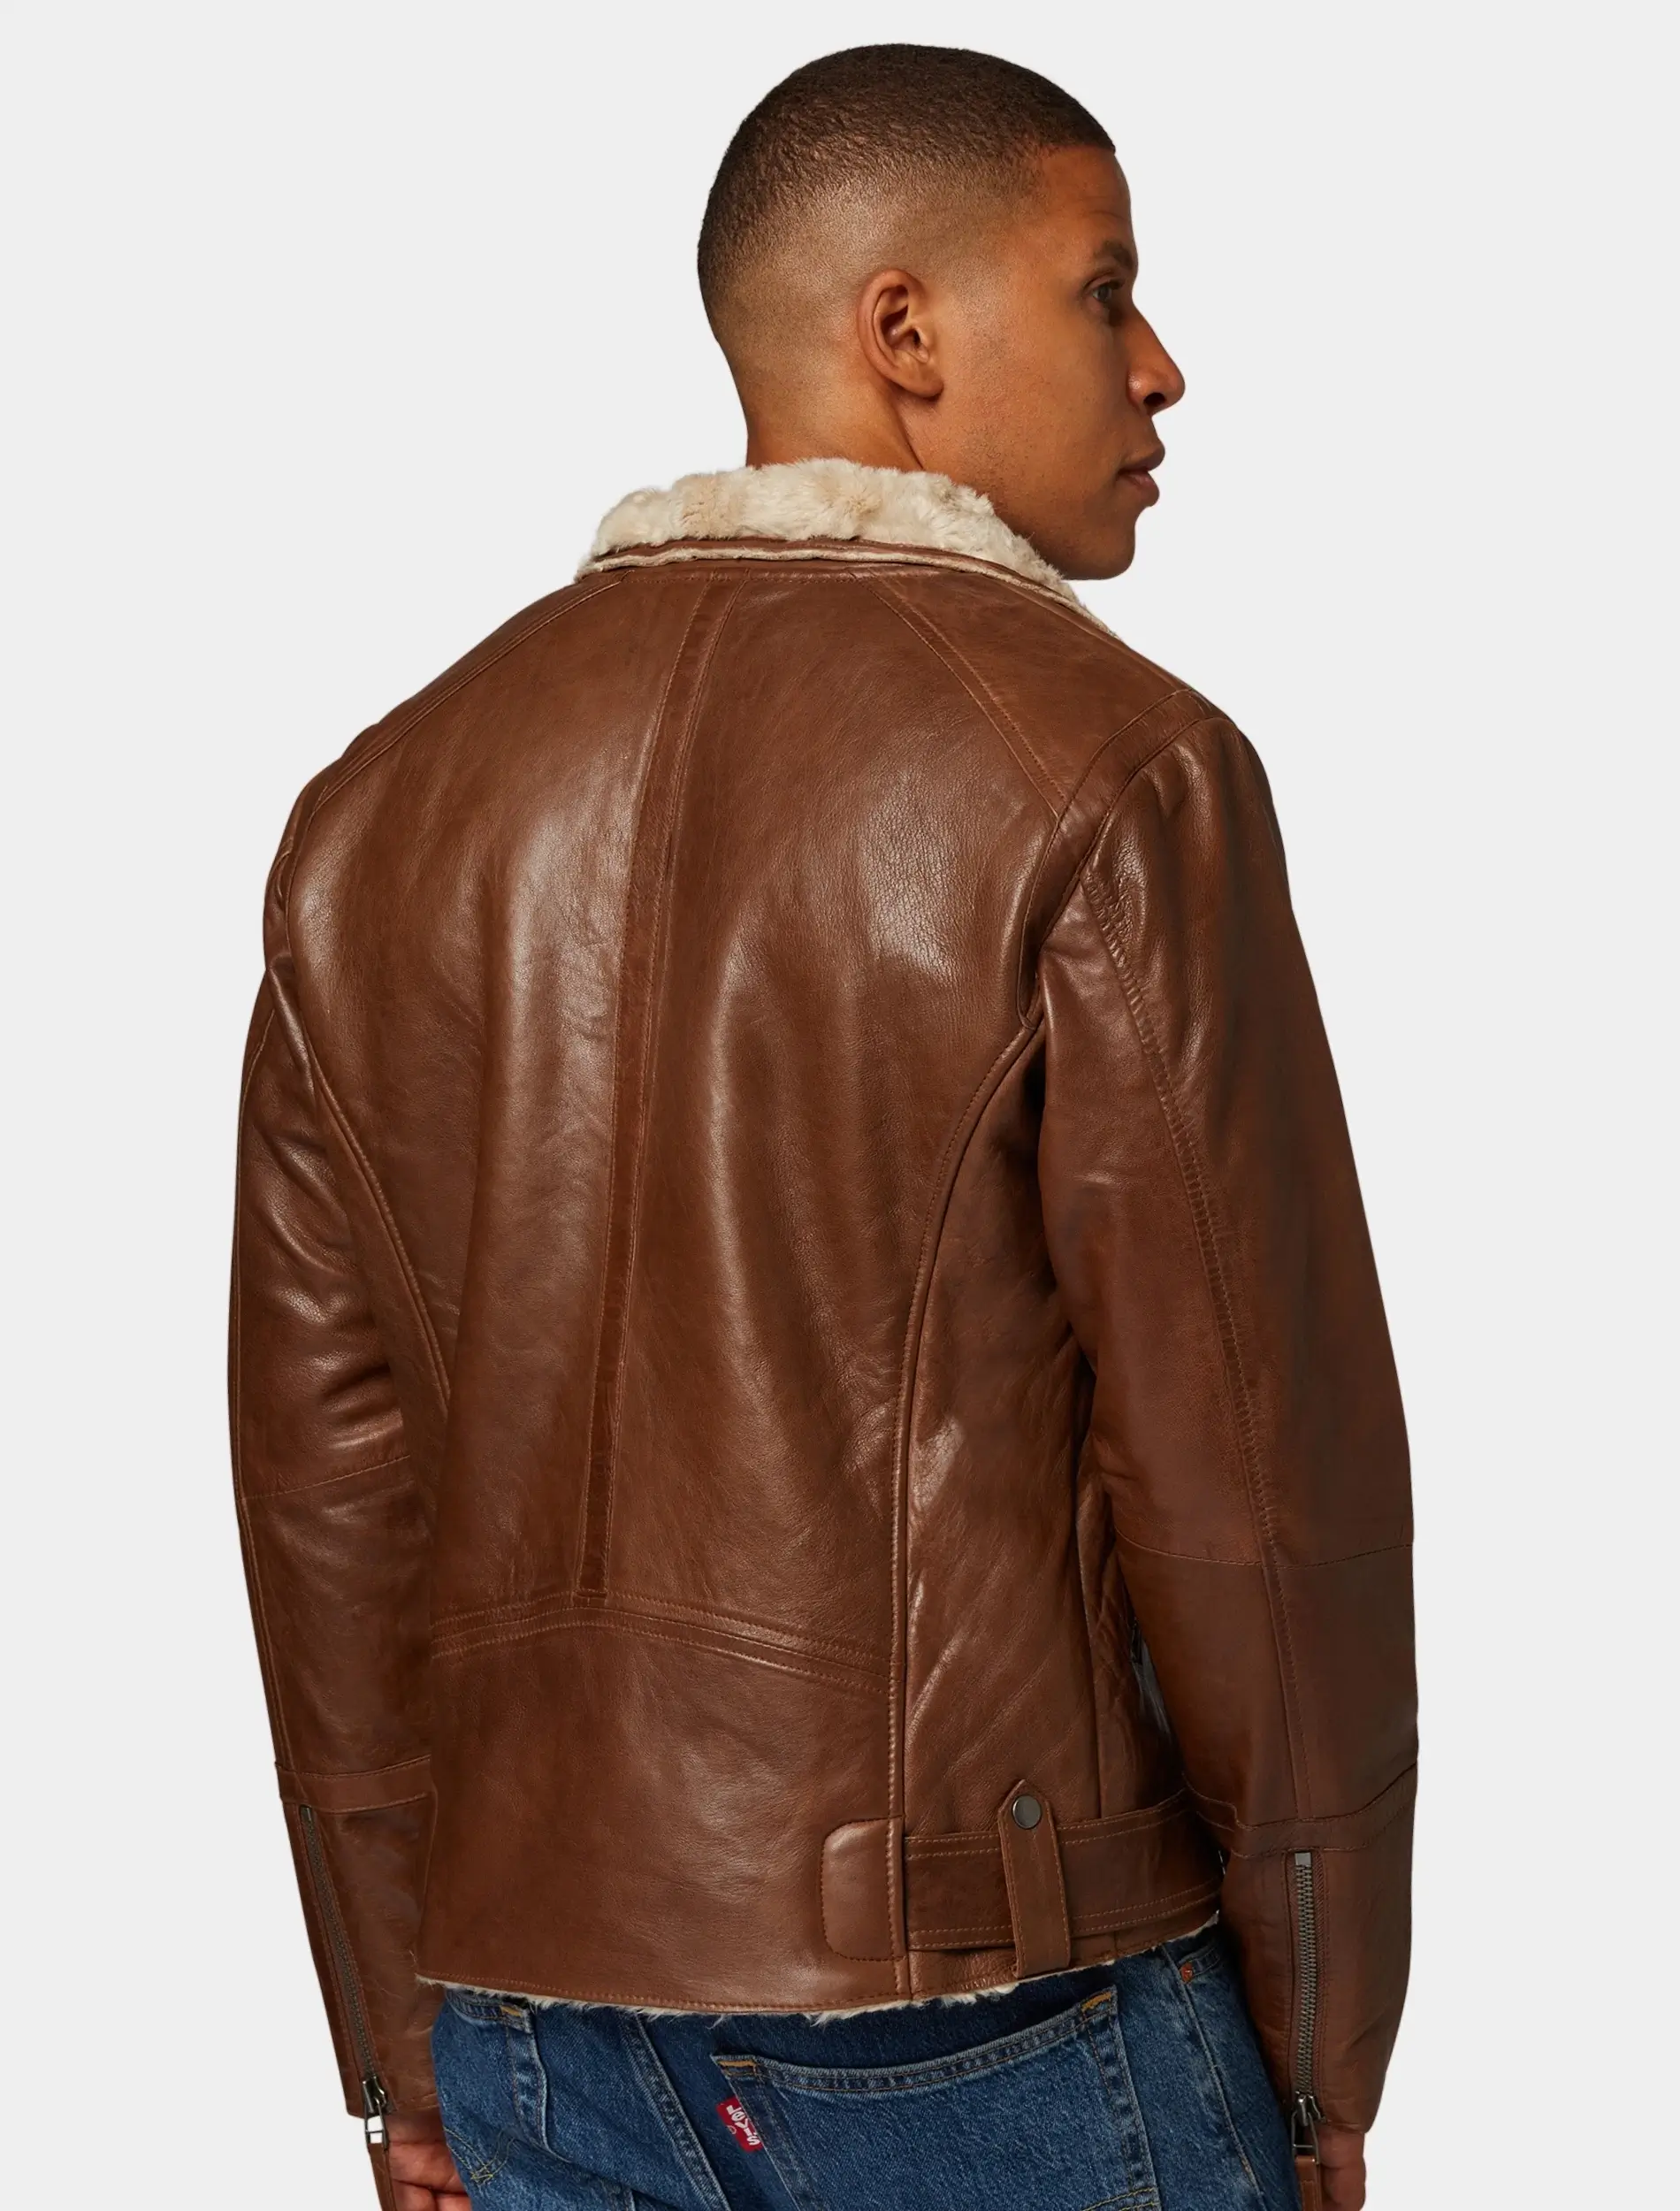 Mens Classic Tan Leather Biker Jacket With Fur Collar Back